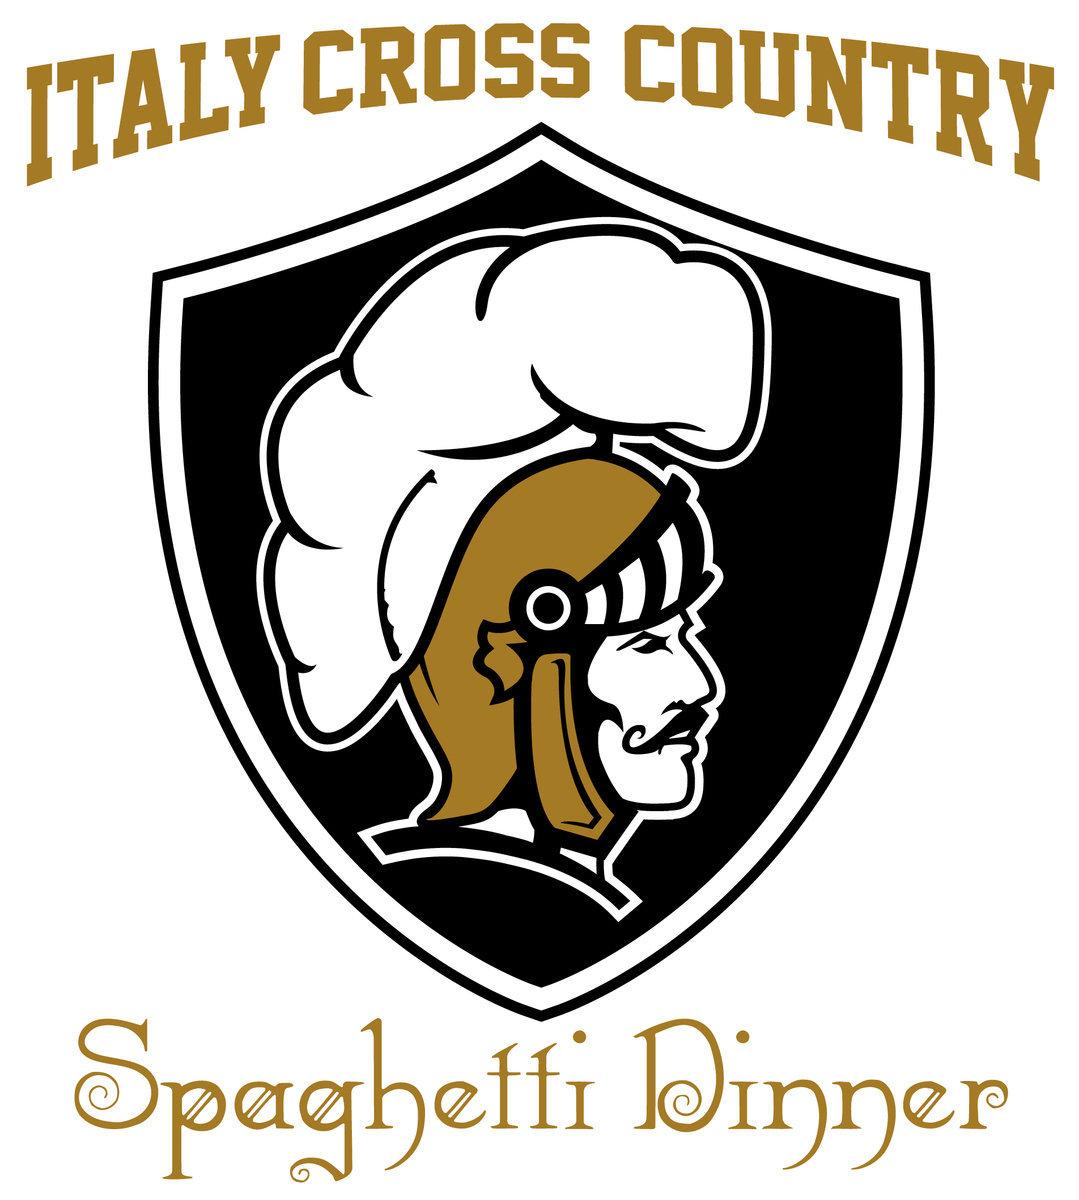 Image: The Italy Cross Country Team will be serving an ALL YOU CAN EAT Spaghetti Dinner inside the Italy High School Cafeteria on Friday, June 19, starting at 6:00 p.m. Everyone is invited!